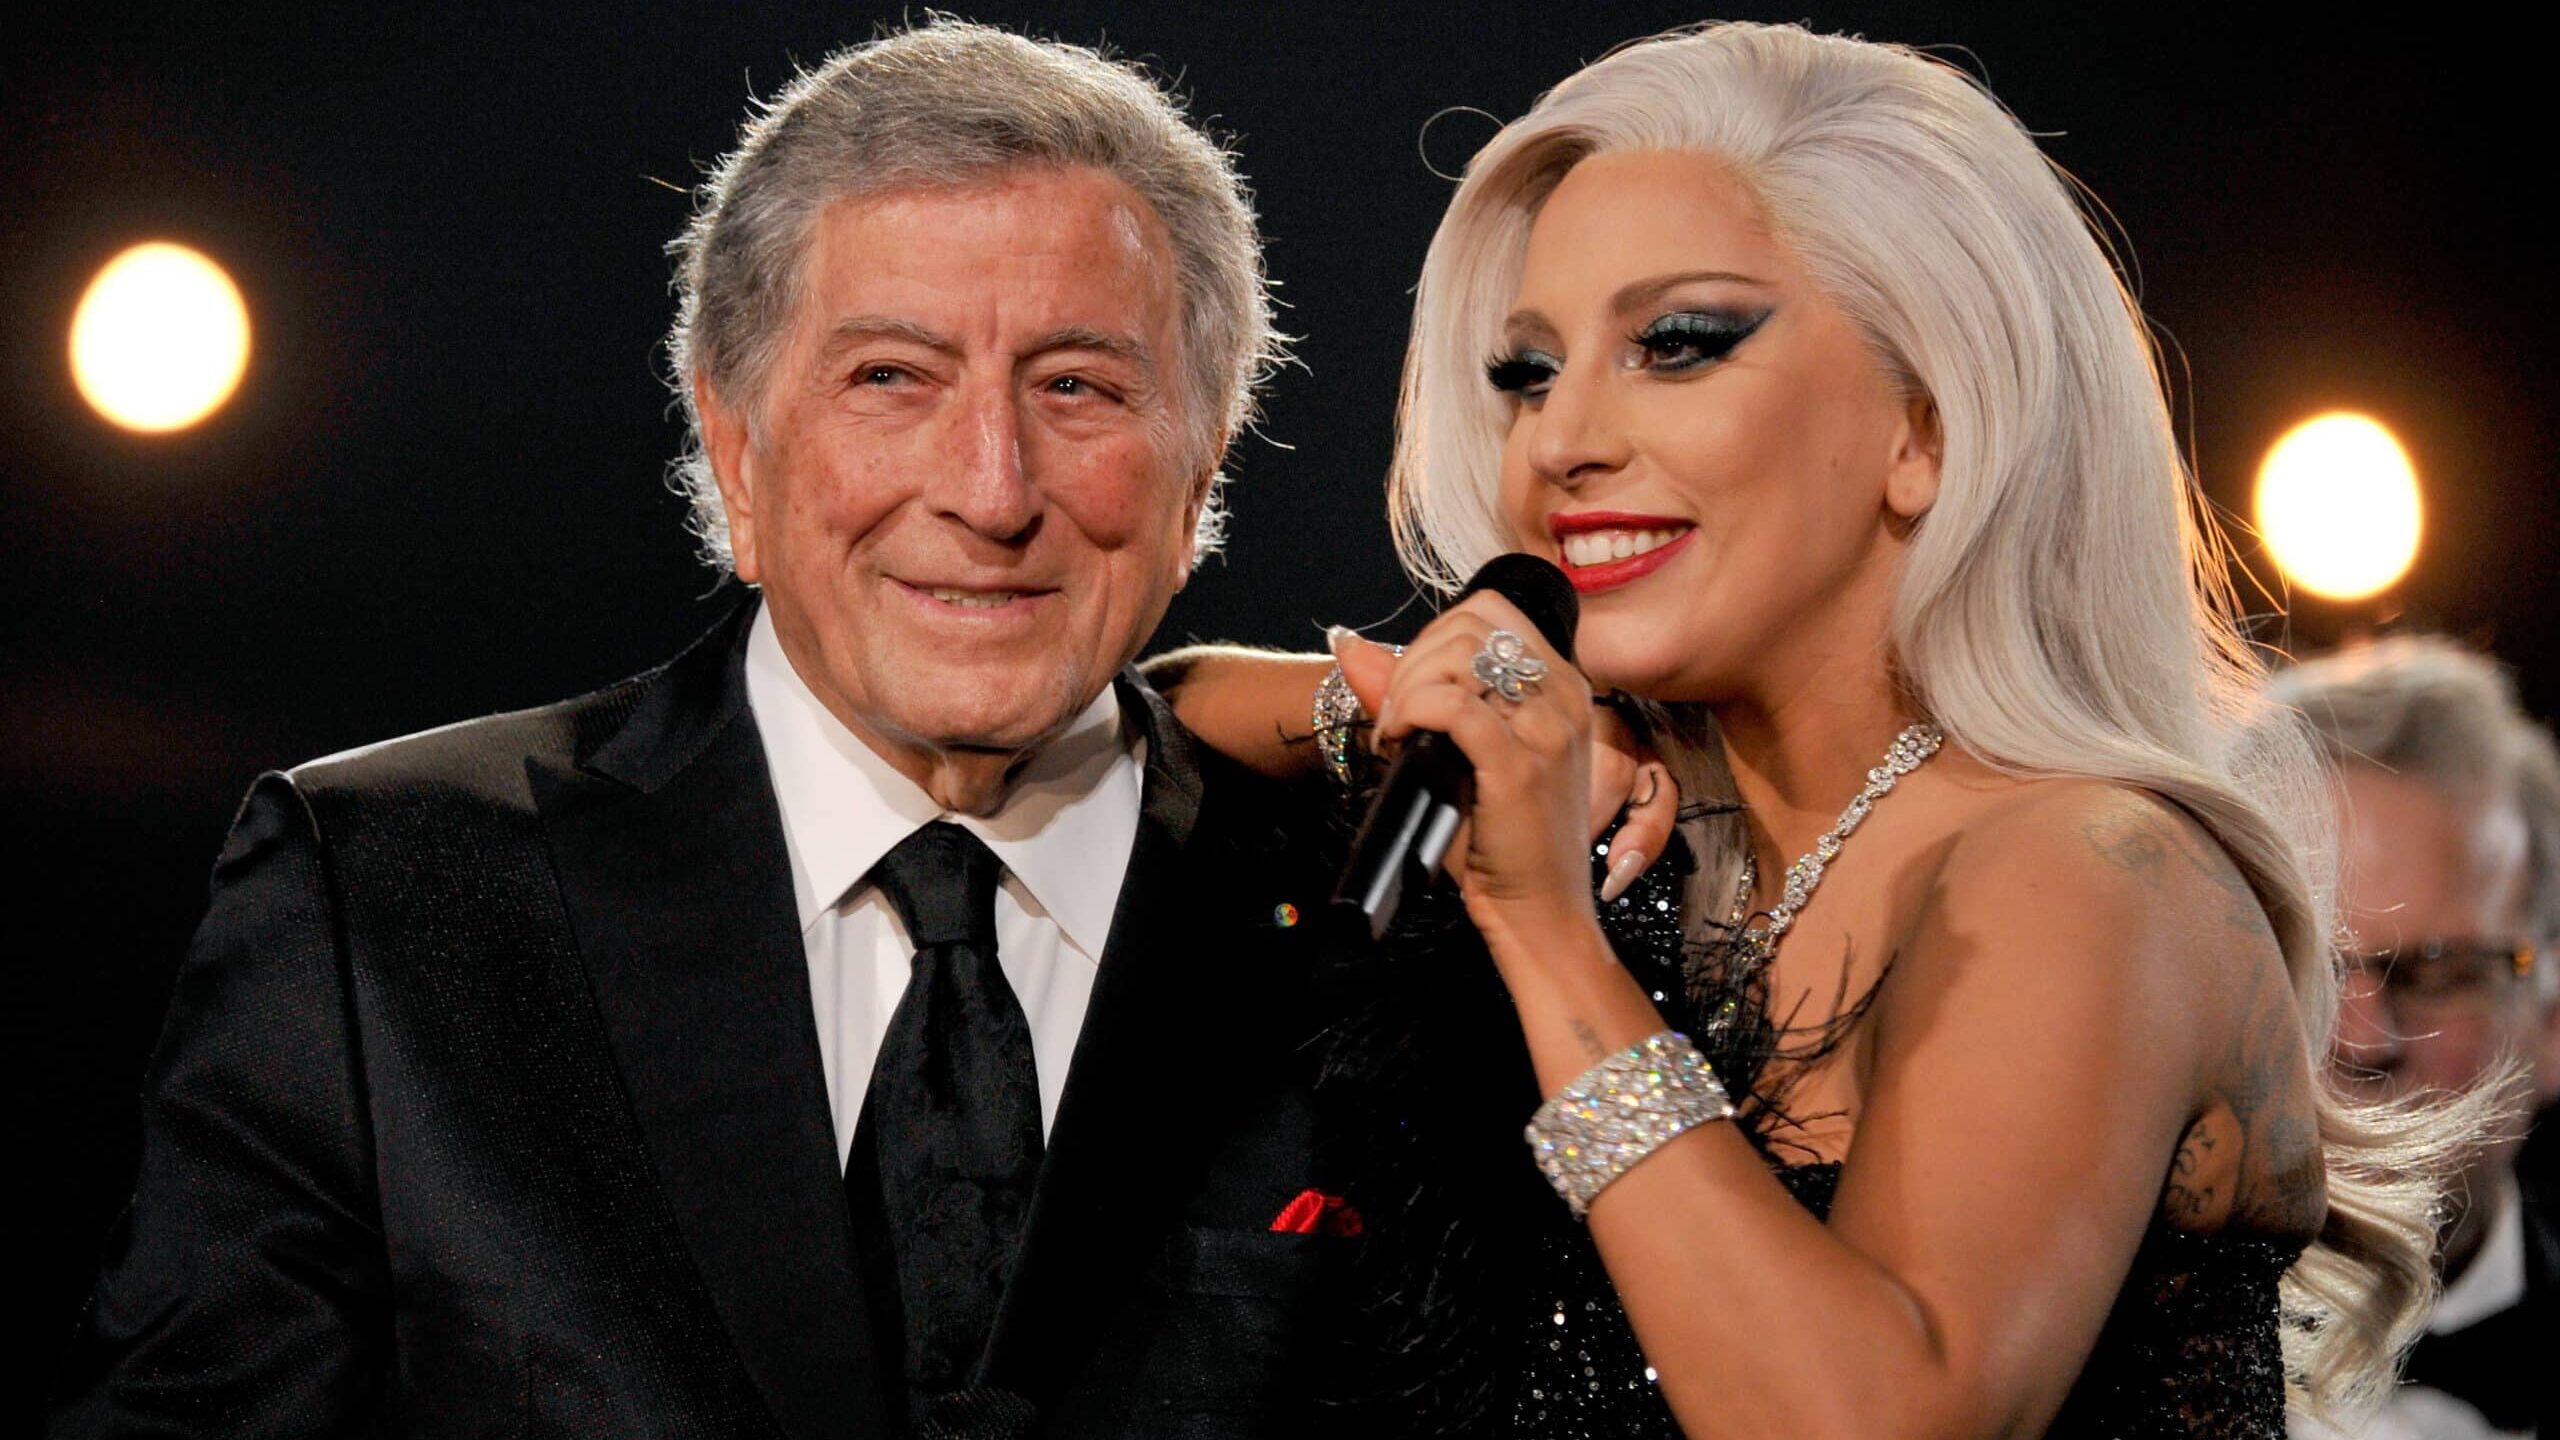 LOS ANGELES, CA - FEBRUARY 08: Recording artists Lady Gaga (R) and Tony Bennett perform onstage during The 57th Annual GRAMMY Awards at the STAPLES Center on February 8, 2015 in Los Angeles, California.